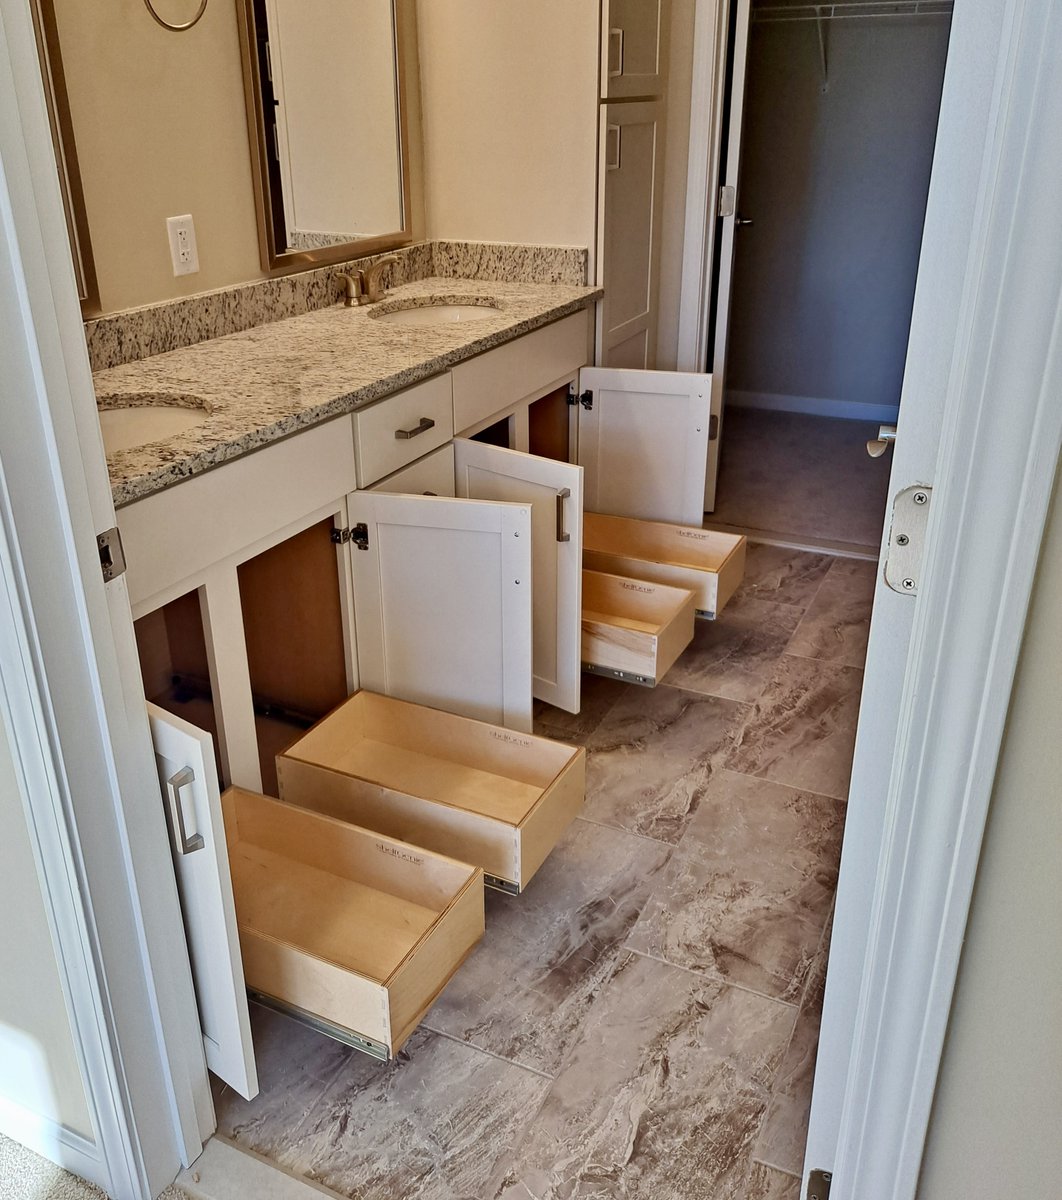 Adding pull-outs under your bathroom sinks makes access easier. Book your free design consultation at: shelfgenie.com #ShelfGenie #bathroom #bathroomorganization #organized #storagesolution #bathroomdesign #bathroomrenovation #sinks